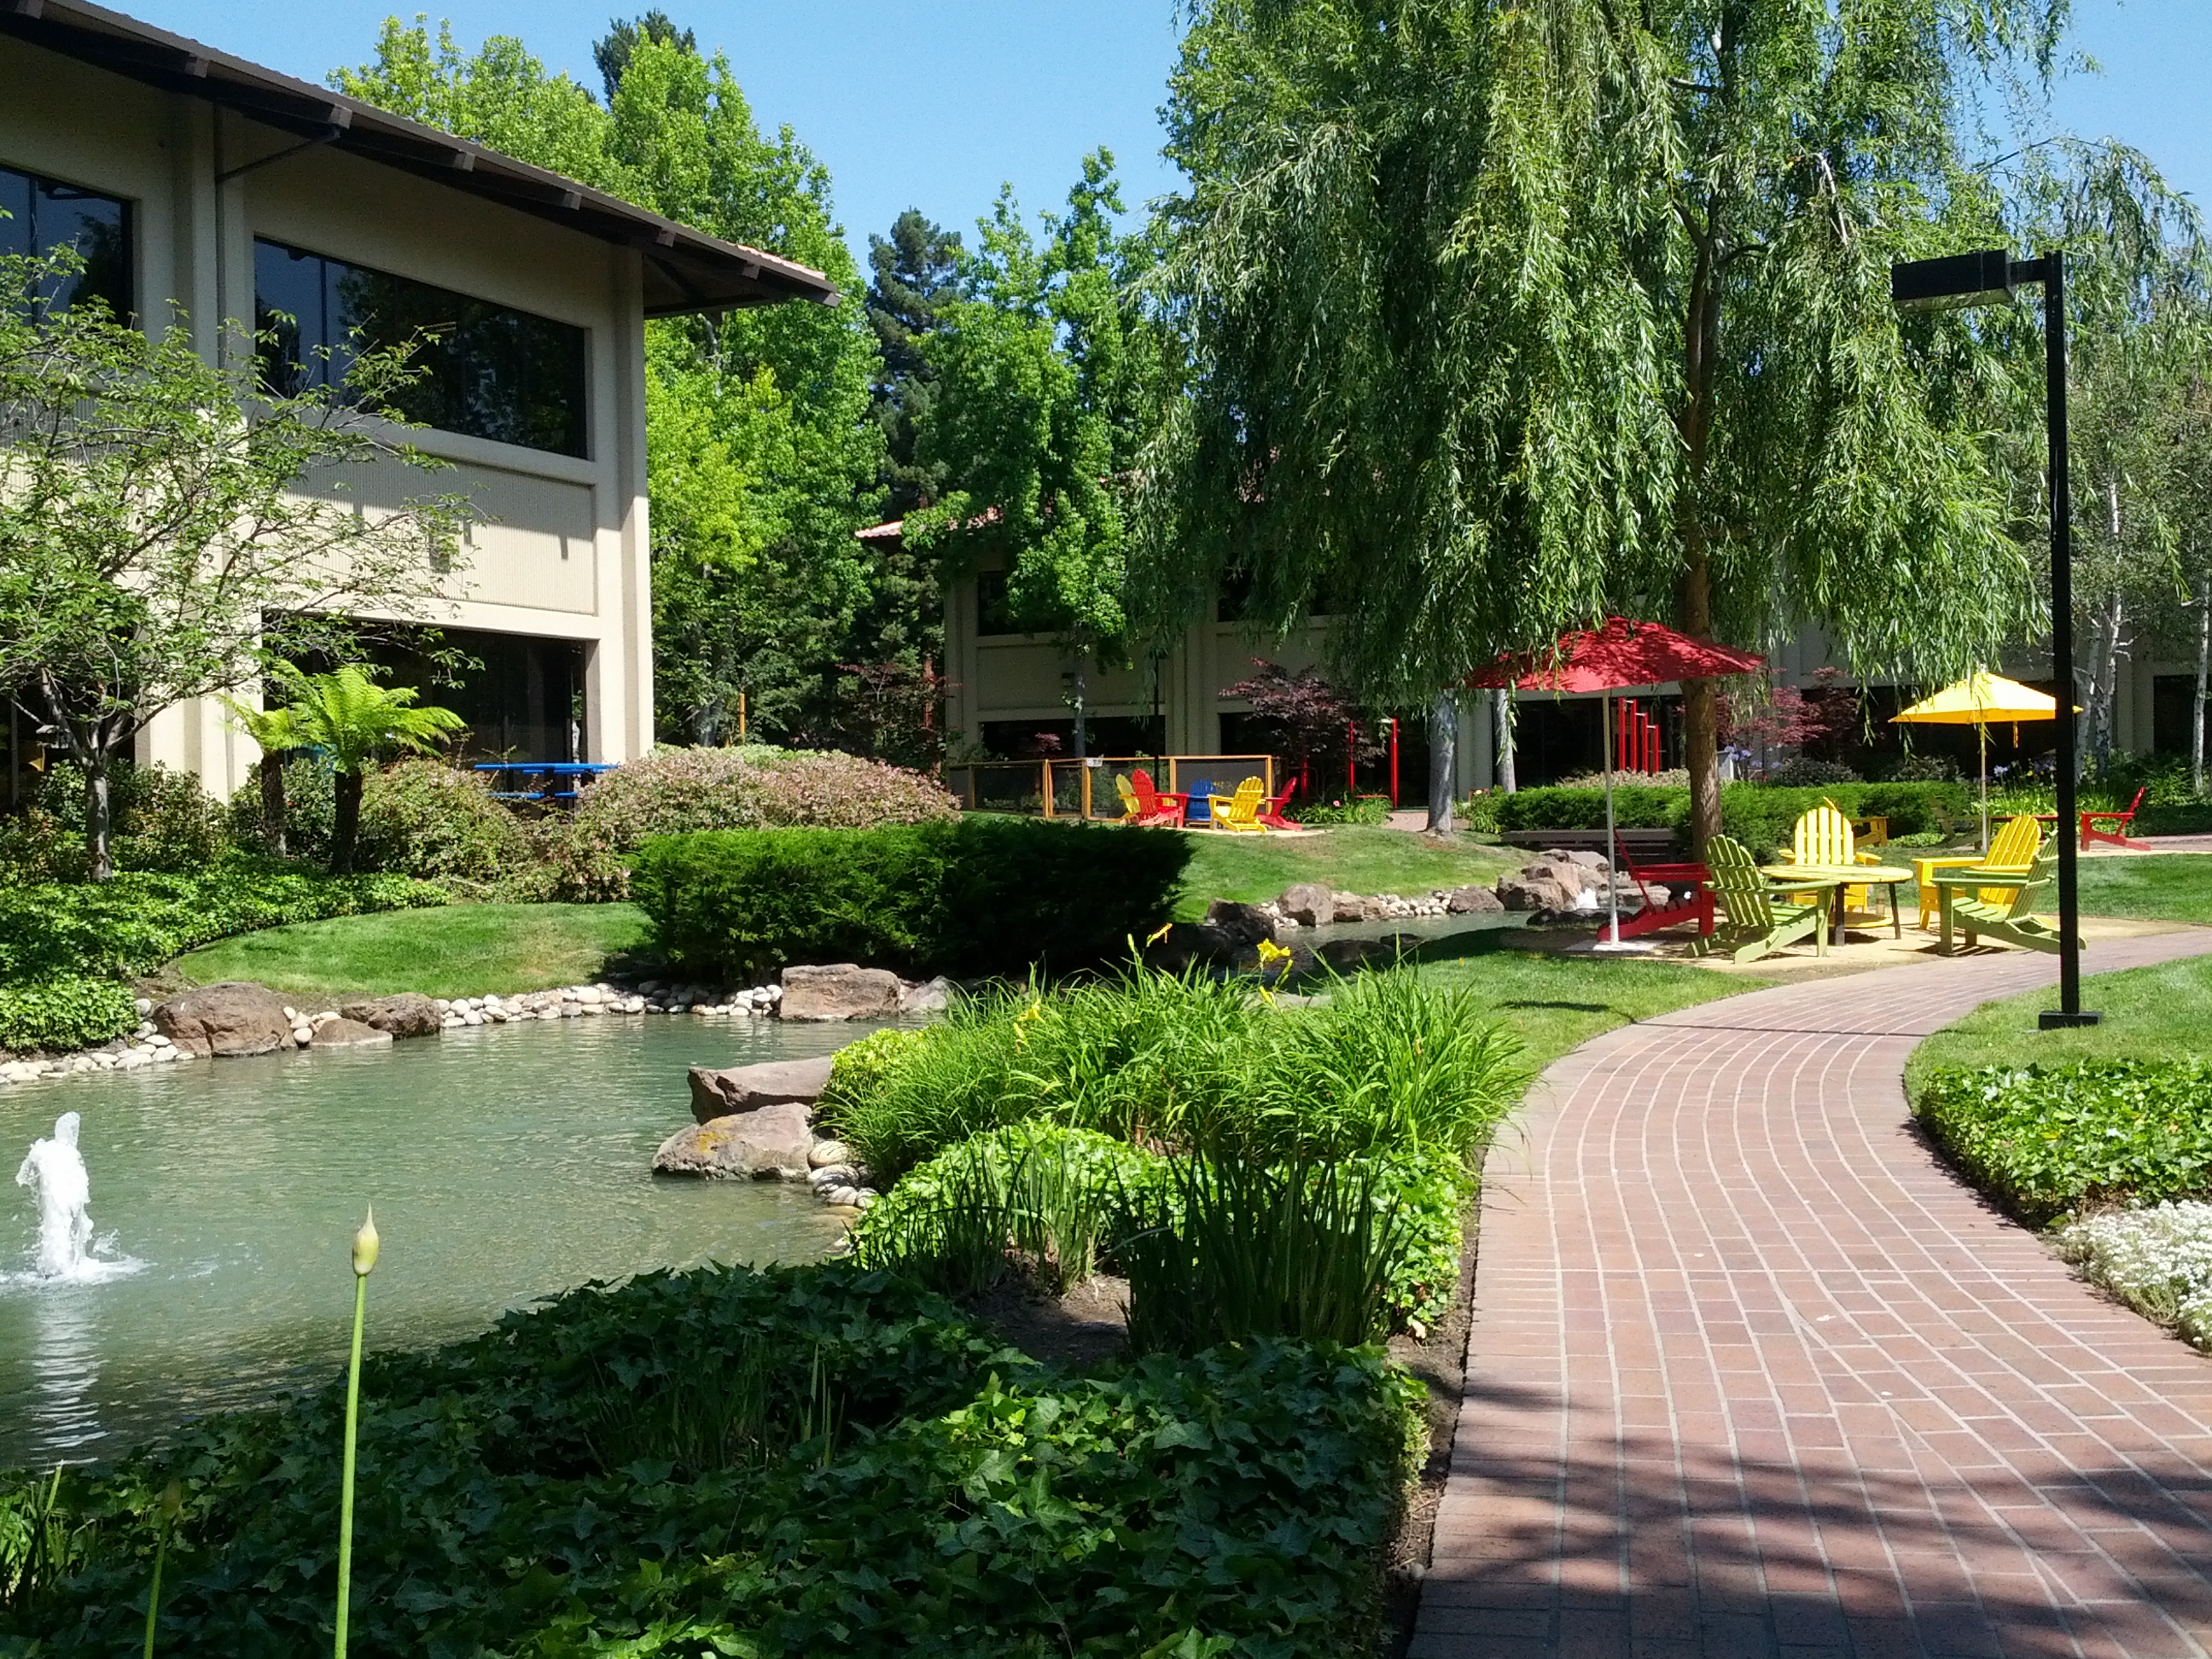 photograph of grounds at Google headquarters, with lawn chairs, picnic tables, and a pond